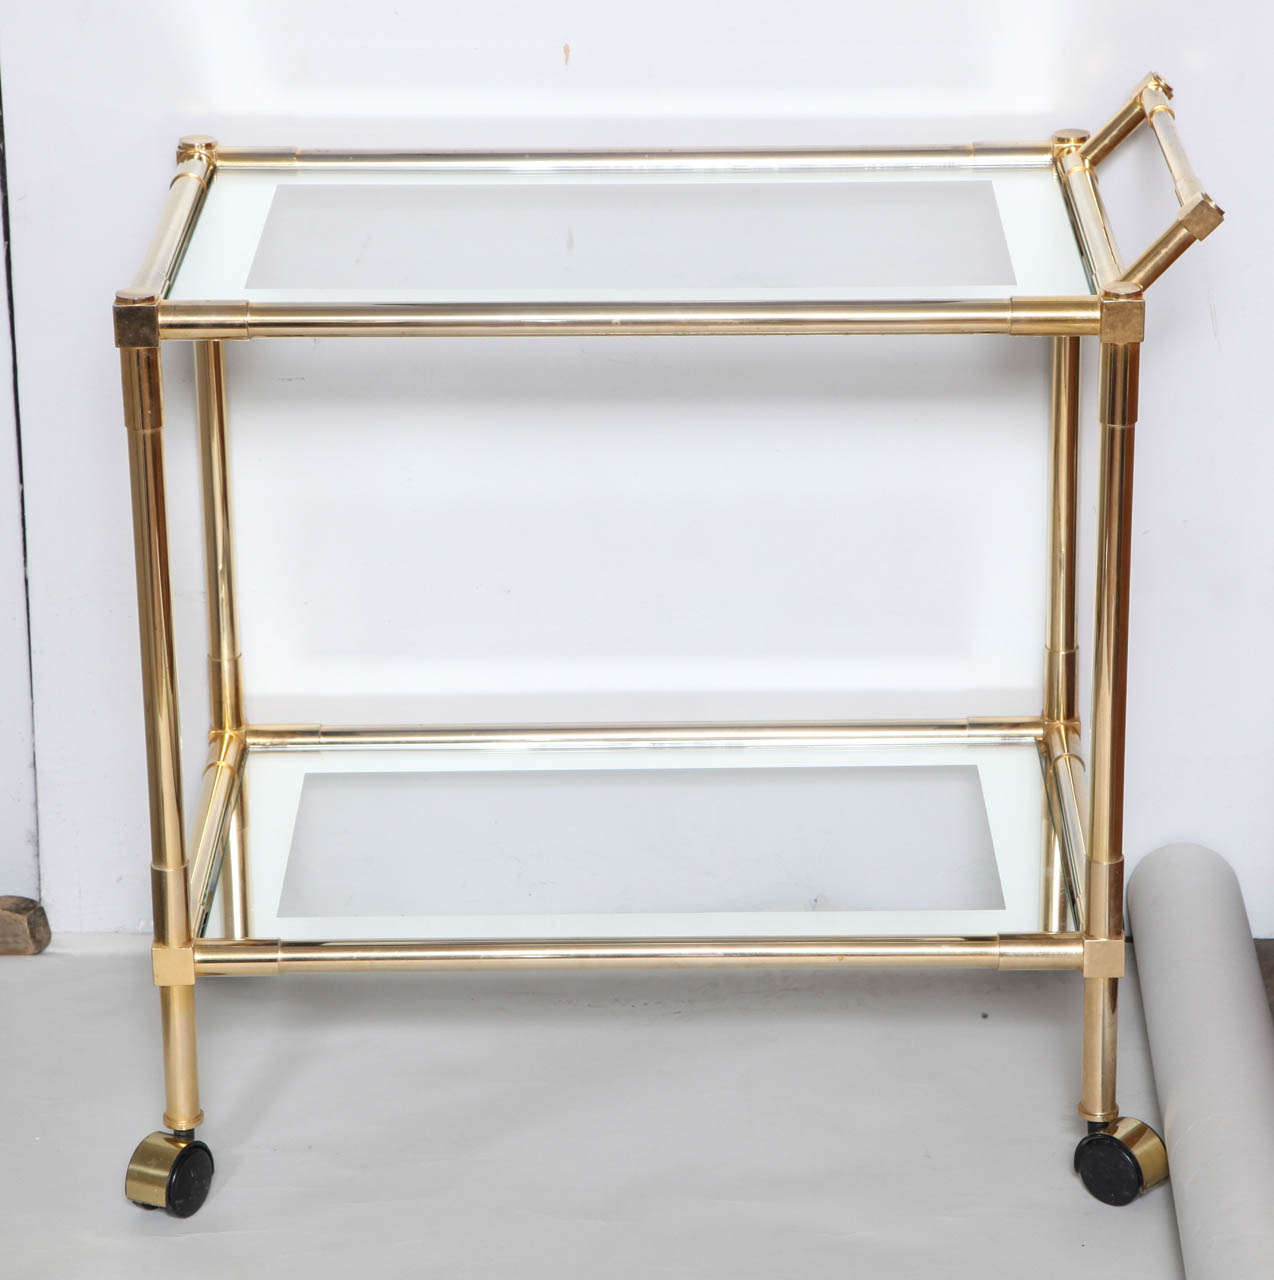 A elegant and sleek mid century designer bar cart with original mirrored framed glass. Finished in a brass vermeil and with squared off detailing.